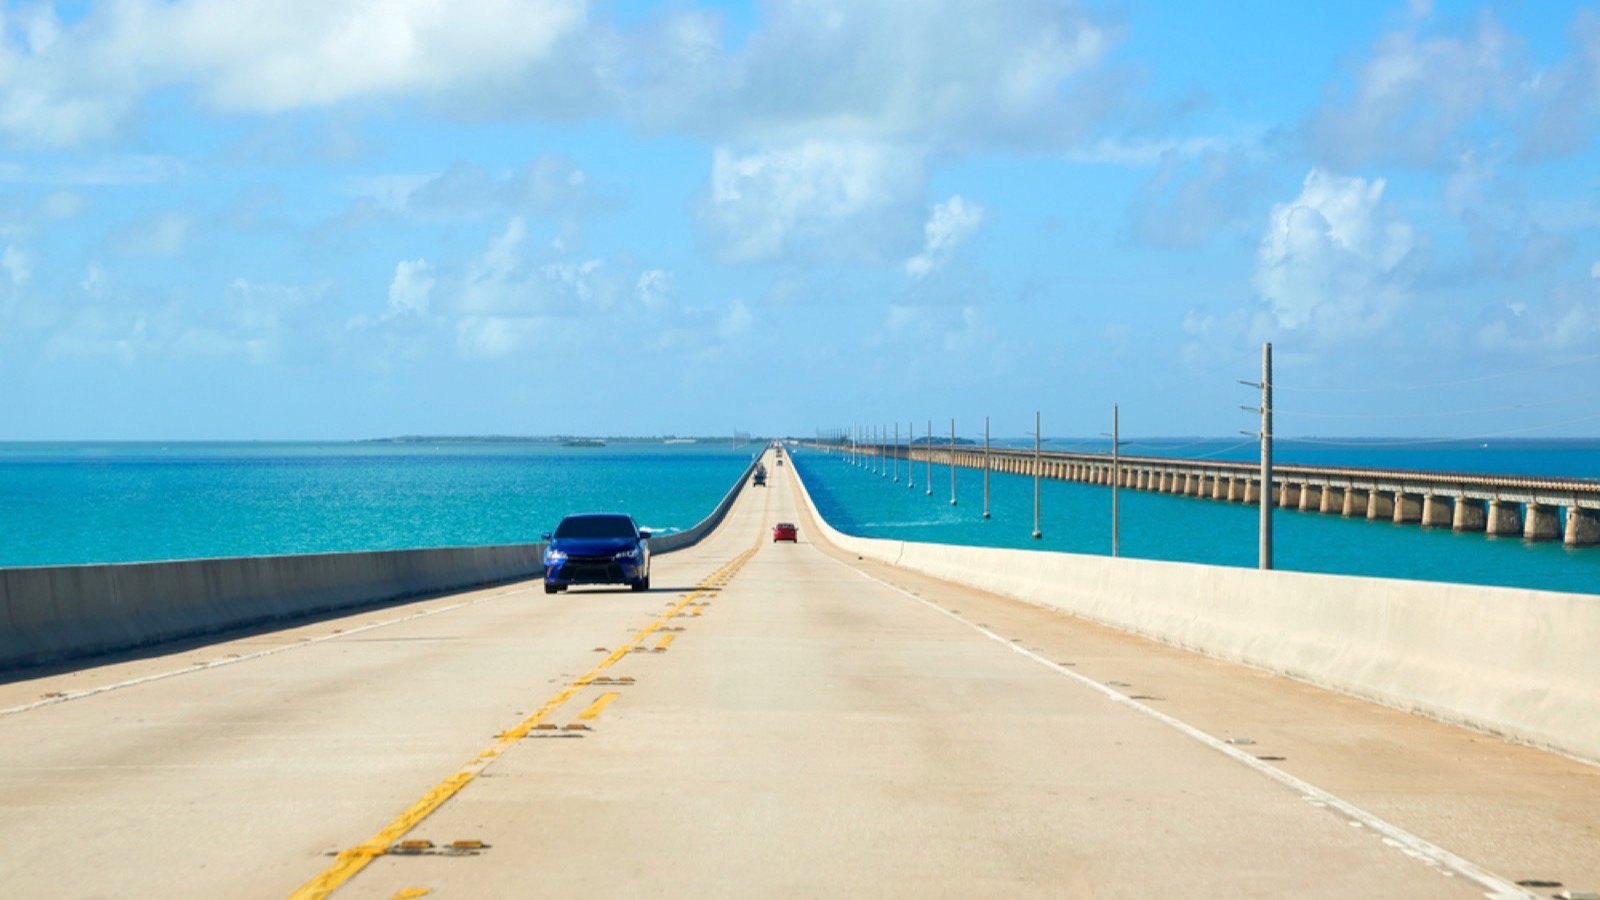 <p>On the Florida Key Scenic Highway road trip, you’ll enjoy 110 miles of ocean views framed by swaying palm trees. Along the way, you can visit the Key West Historic District and John Pennekamp Coral Reef State Park.</p><p>Besides the views, check out the Ernest Hemingway Home and Museum, Coral Castle, created by artist Edward Leedskalnin from coral reef rock, and the Turtle Hospital to learn about conservation efforts. Don’t forget the Seven Mile Bridge and Theater of the Seato swim with dolphins in Islamorada.</p>